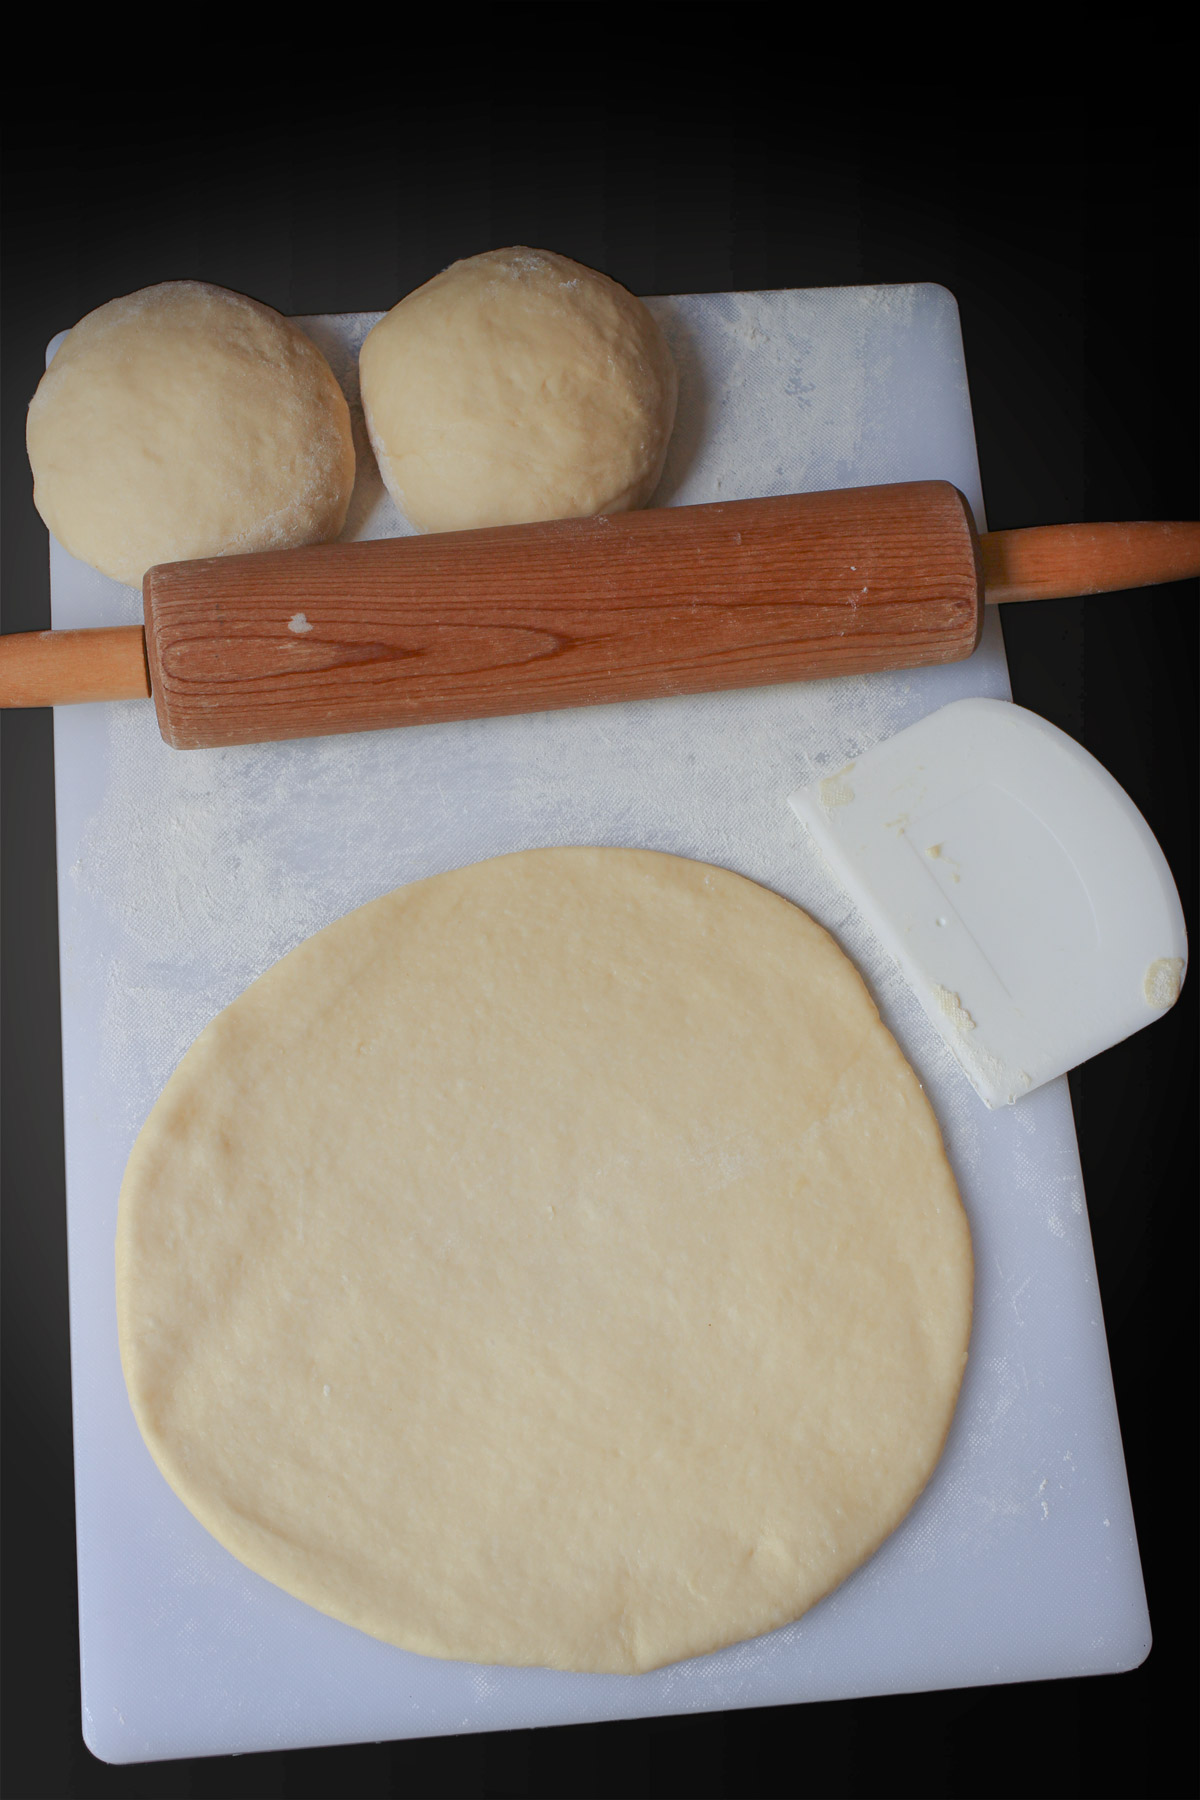 the round of dough on the floured surface with a bench knife, rolling pin, and two more balls of dough.